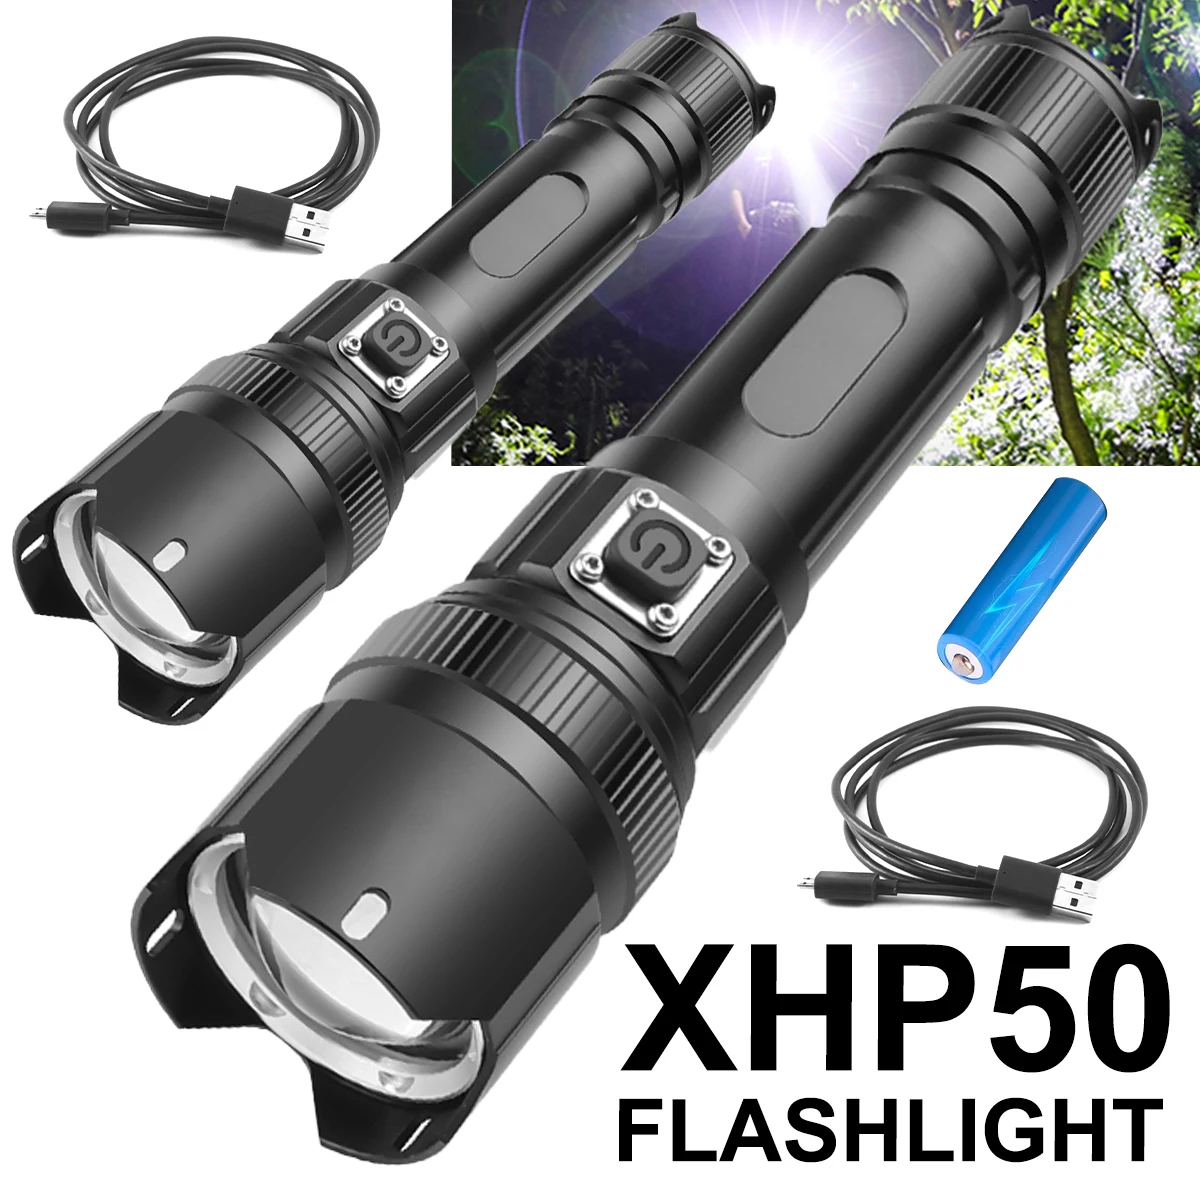 

Rechargeable LED Flashlight XHP50 LED Tactical Flashlight 800-1000 Lumens Zoomable Torch Flashlight IPX4 Emergency Searchlight